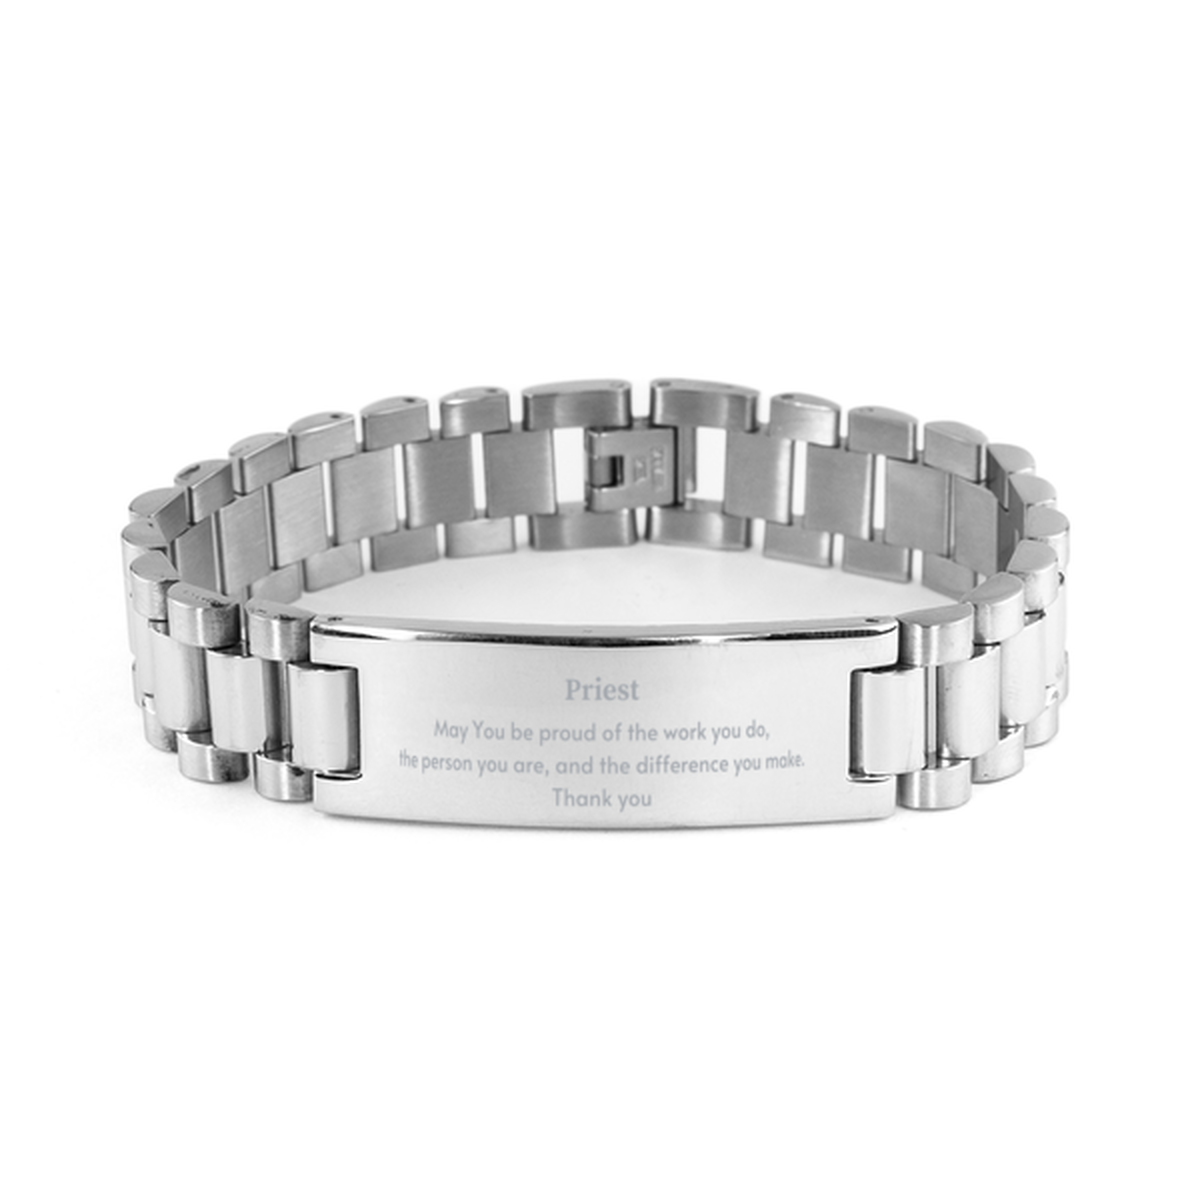 Heartwarming Ladder Stainless Steel Bracelet Retirement Coworkers Gifts for Priest, Priest May You be proud of the work you do, the person you are Gifts for Boss Men Women Friends